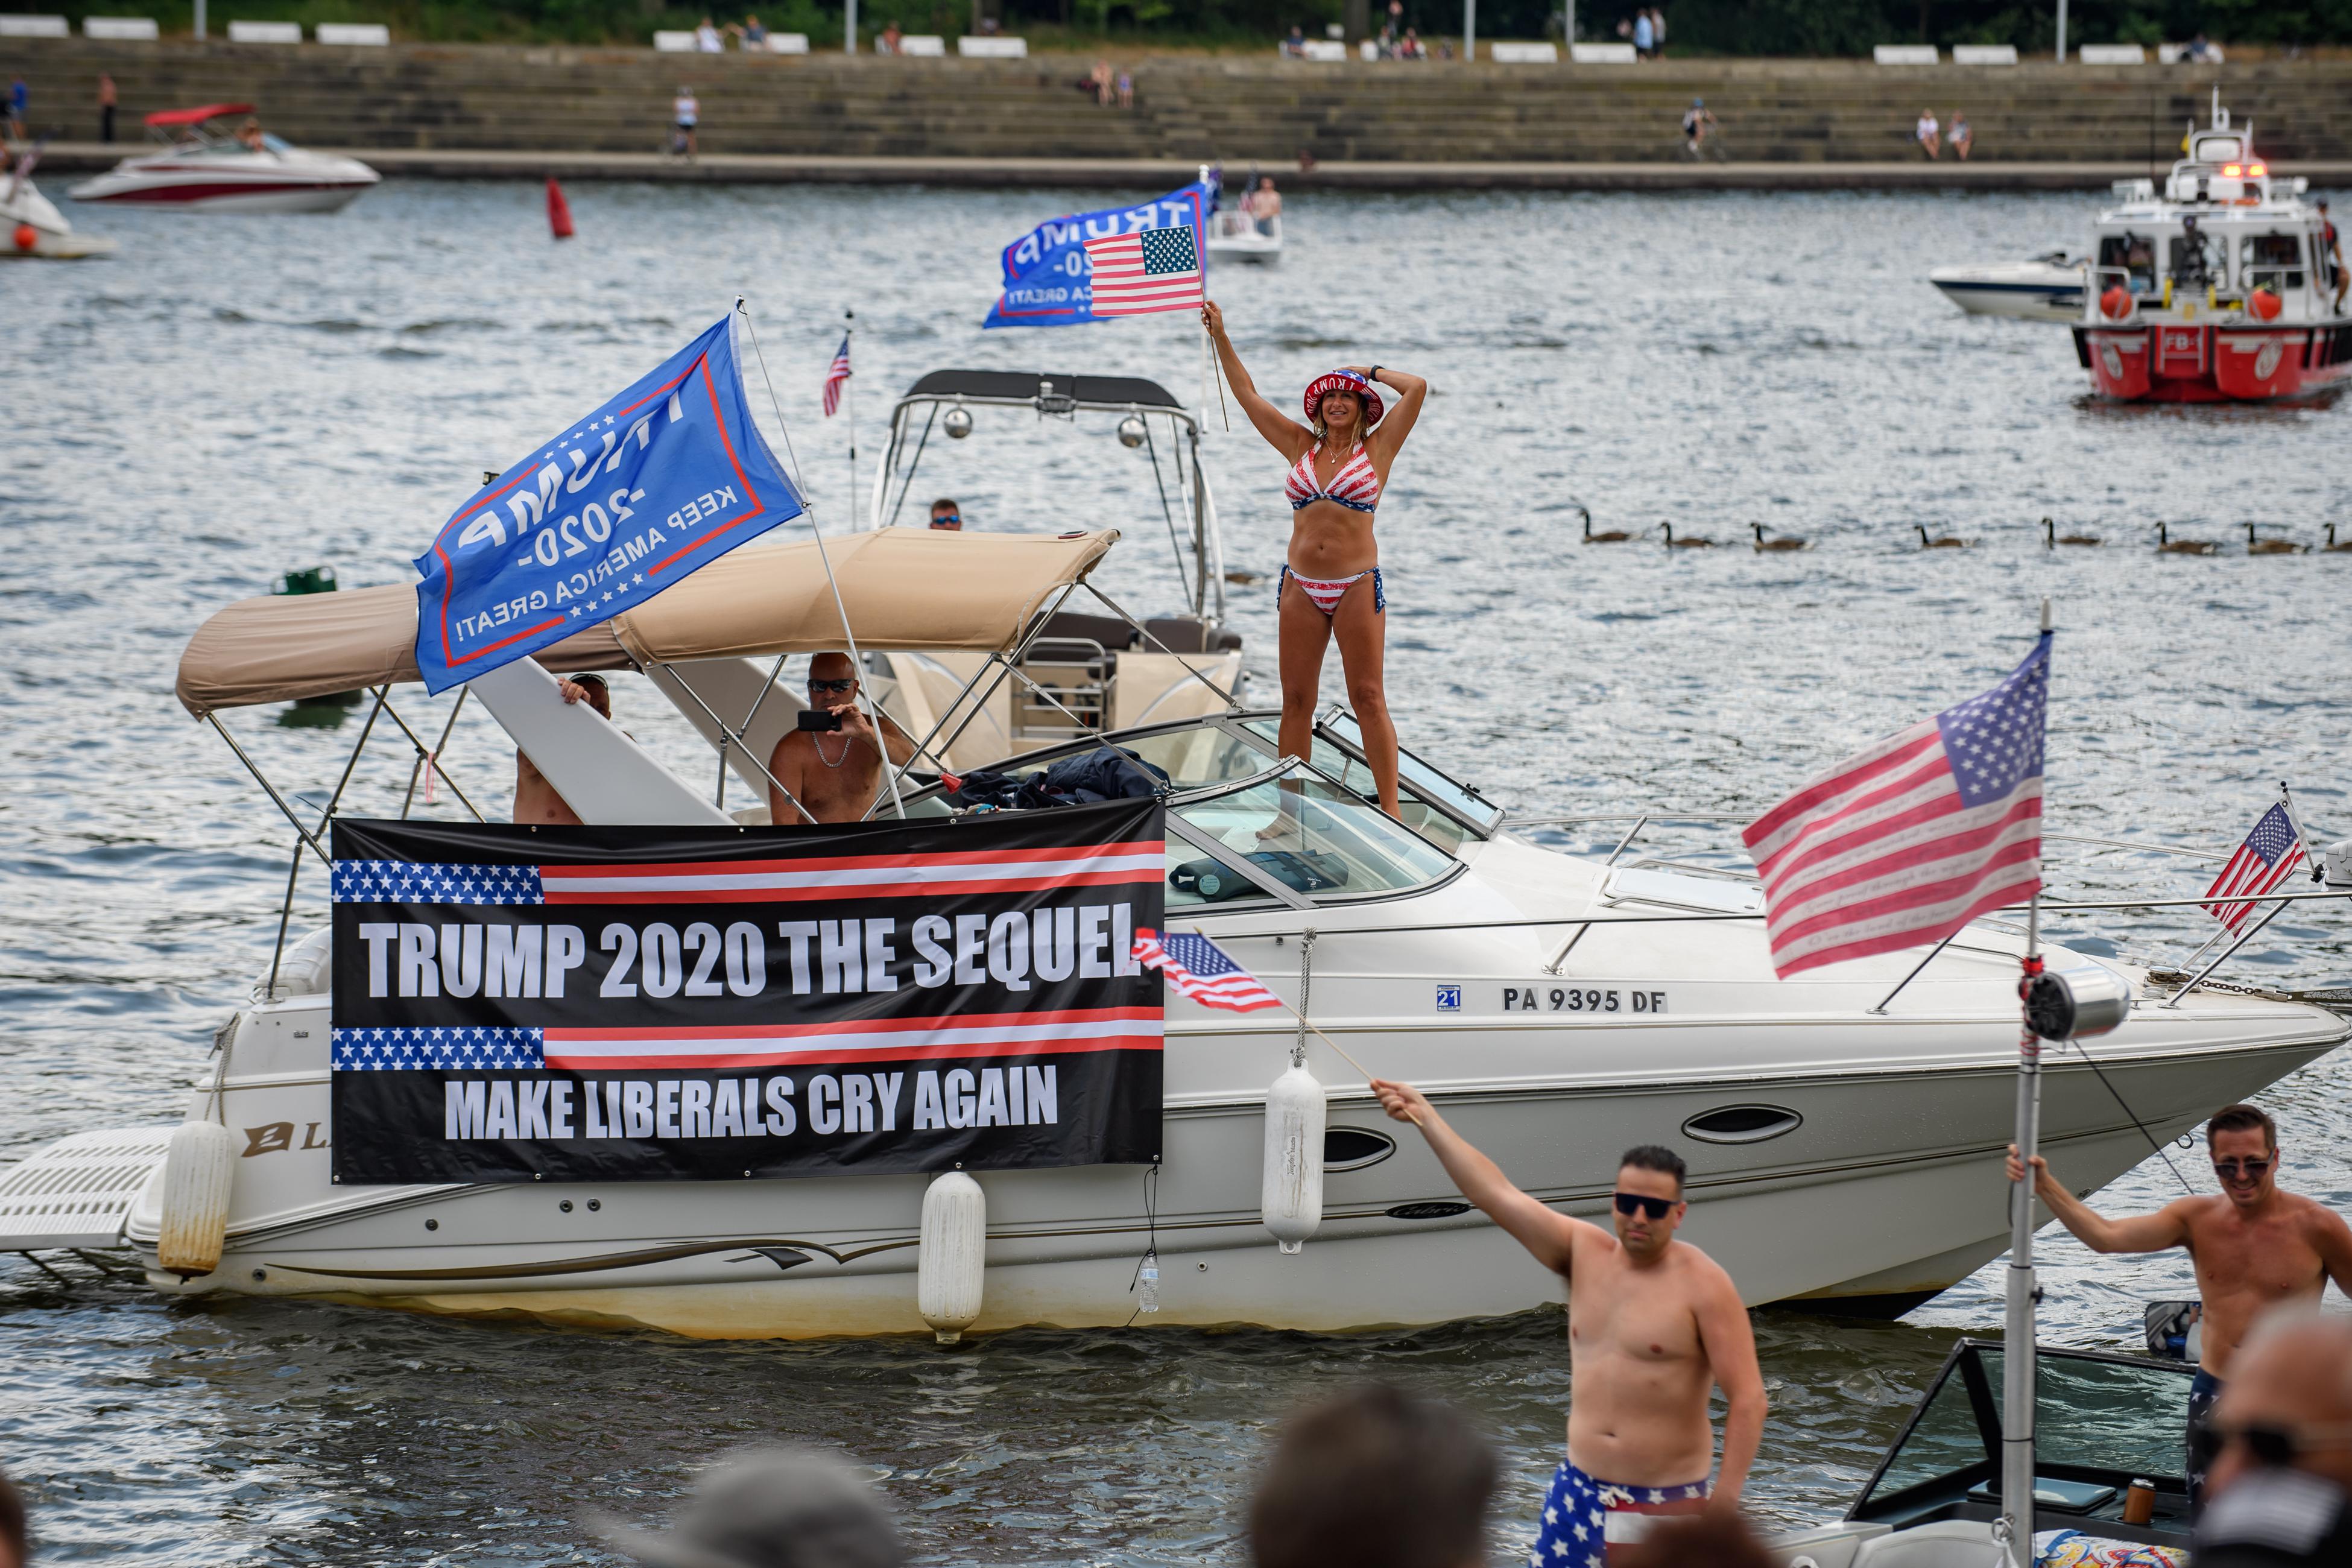 A yacht on a body of water. It has a pro-Trump banner hanging on it, a man driving holding up a Trump flag, and a woman standing on top of it in an American flag bikini, waving an American flag.